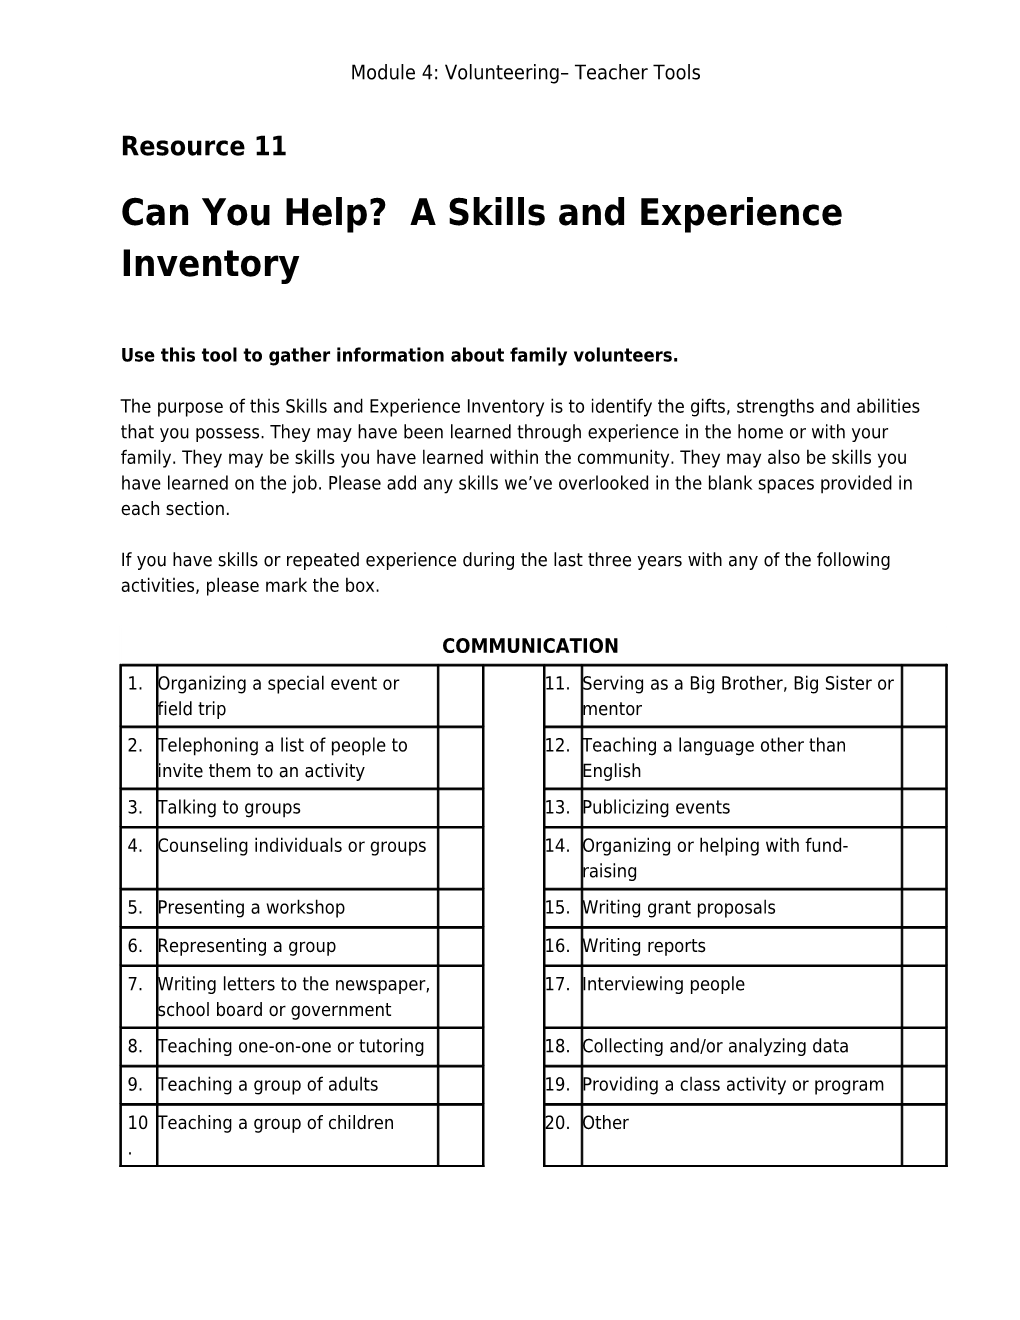 Can You Help? a Skills and Experience Inventory